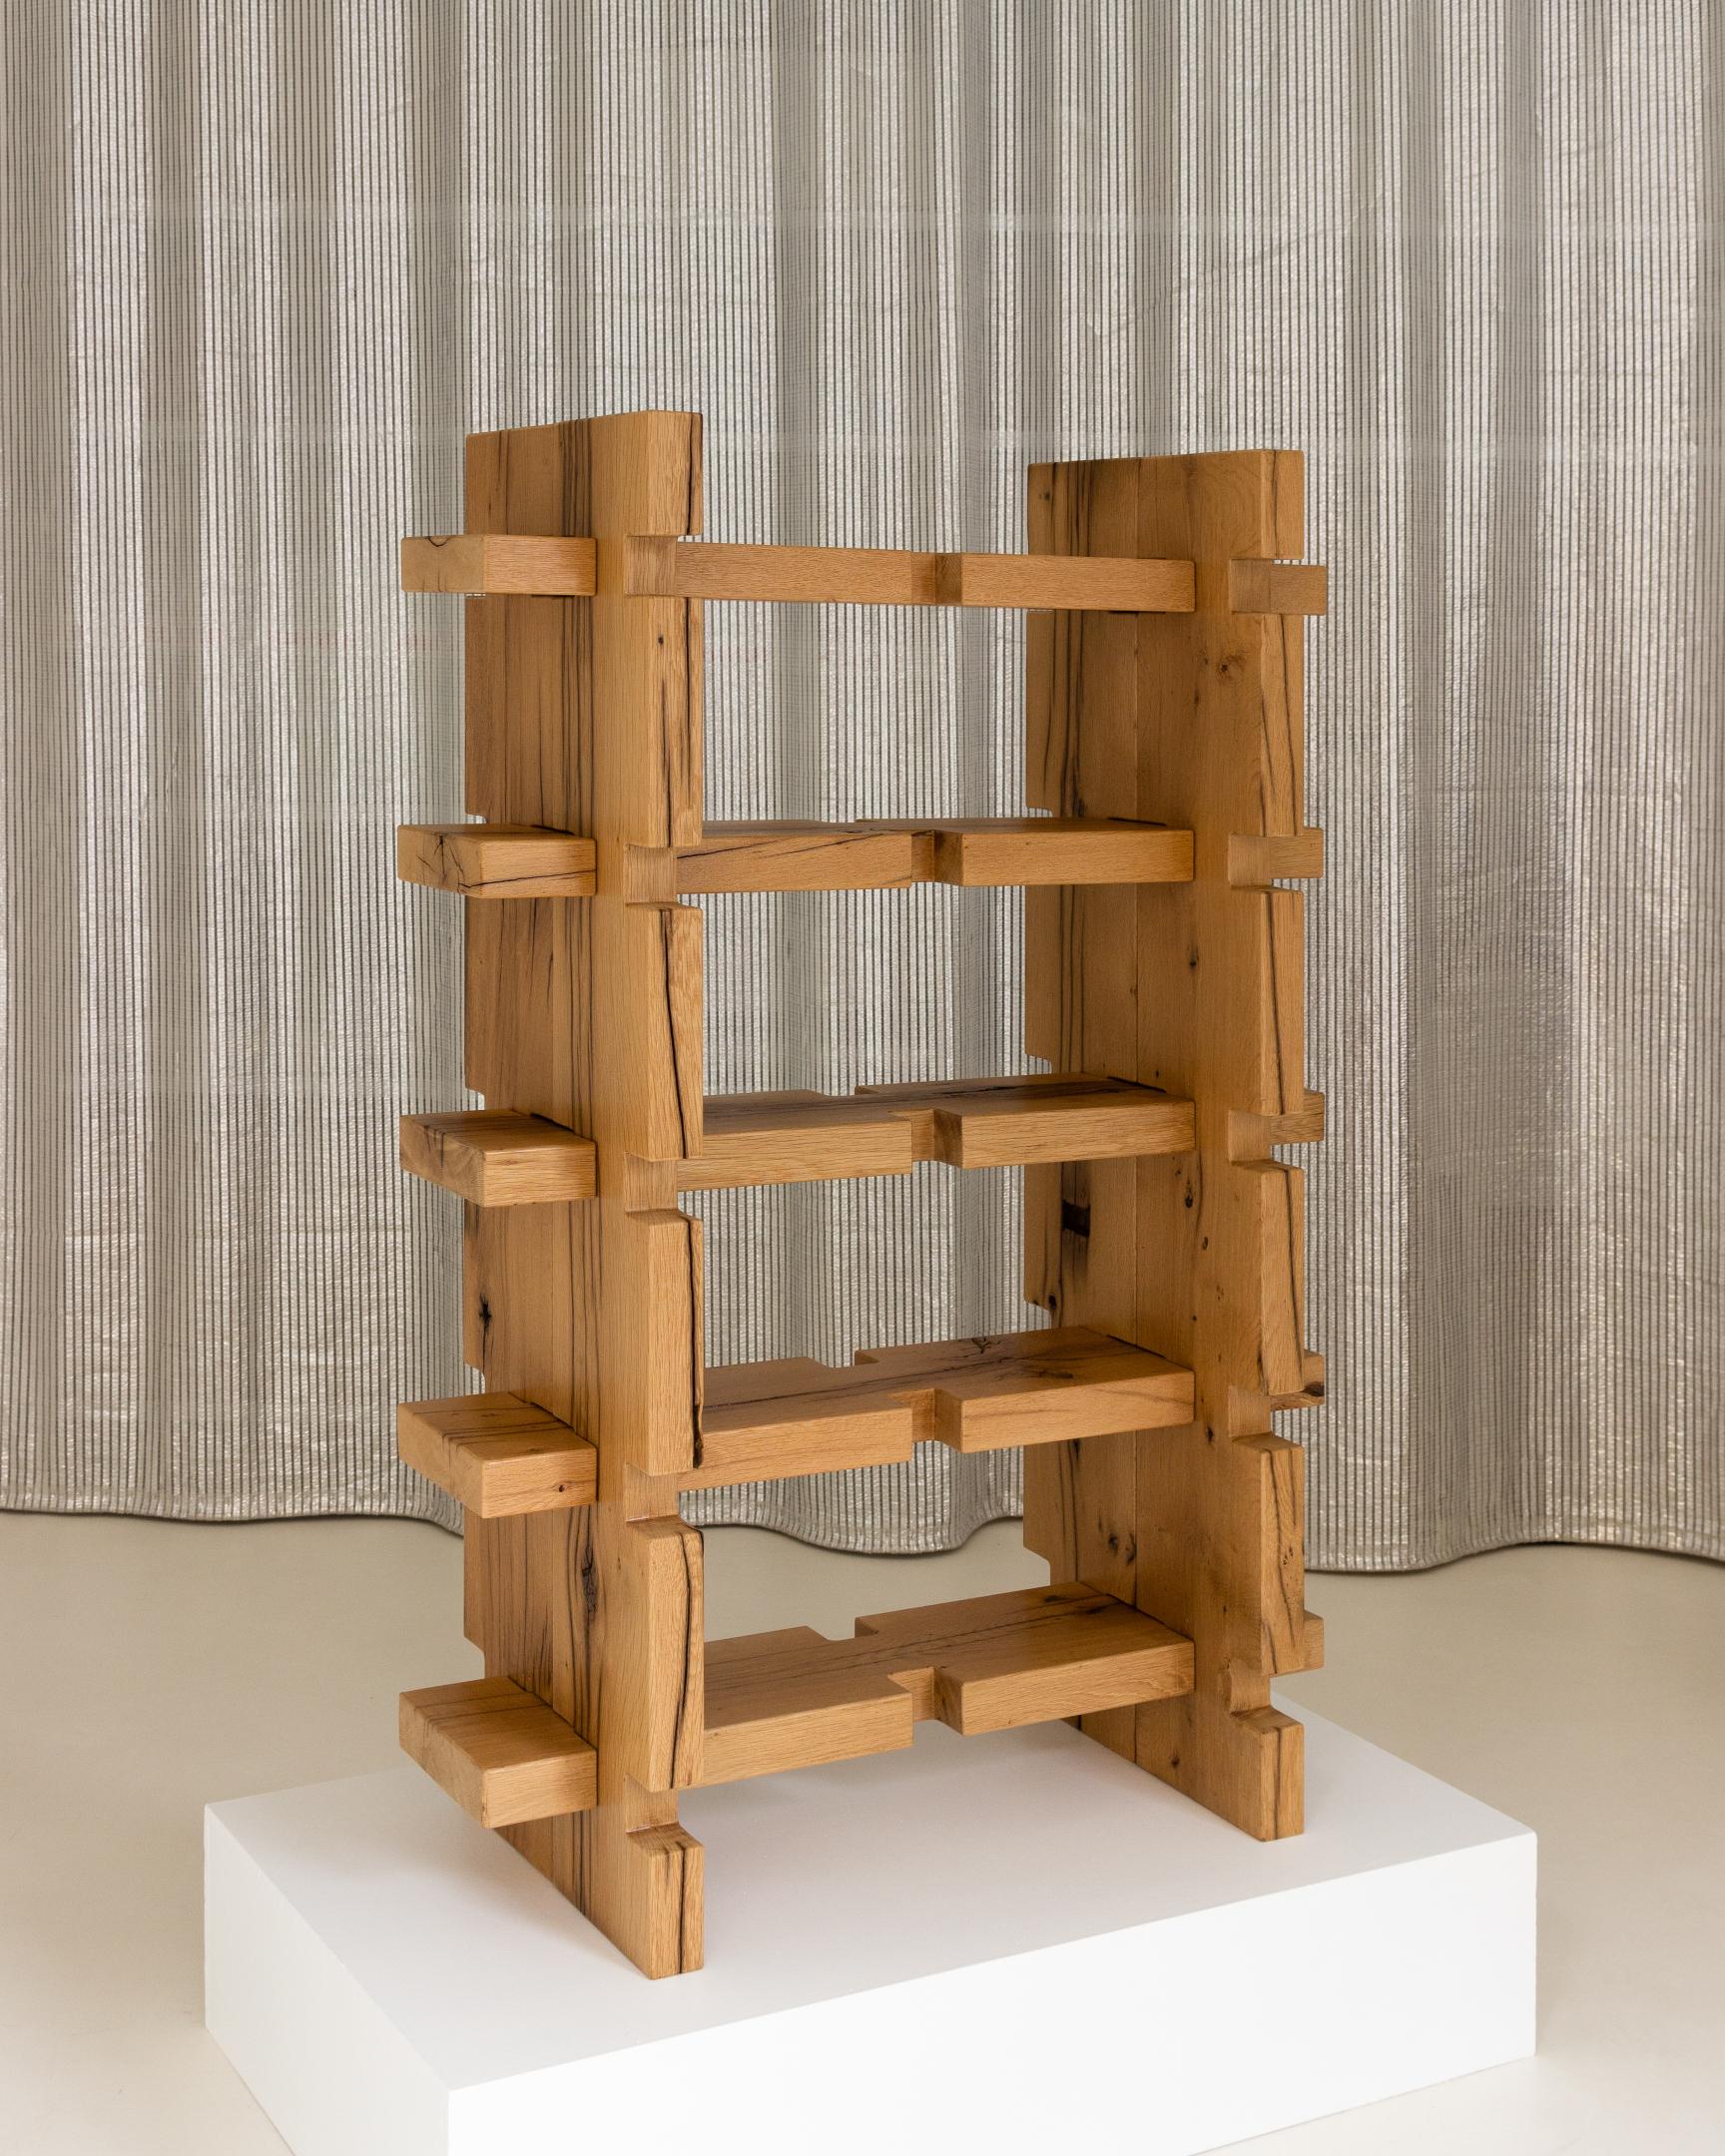 Element Shelf by Nana Zaalishvili
Dimensions: W 125 x D 40 x H 85 cm
Materials: Century Old Oak

‘Element’, which combines furniture of different functions, was created under the influence of the Georgian Oda house and the 'construction element' by